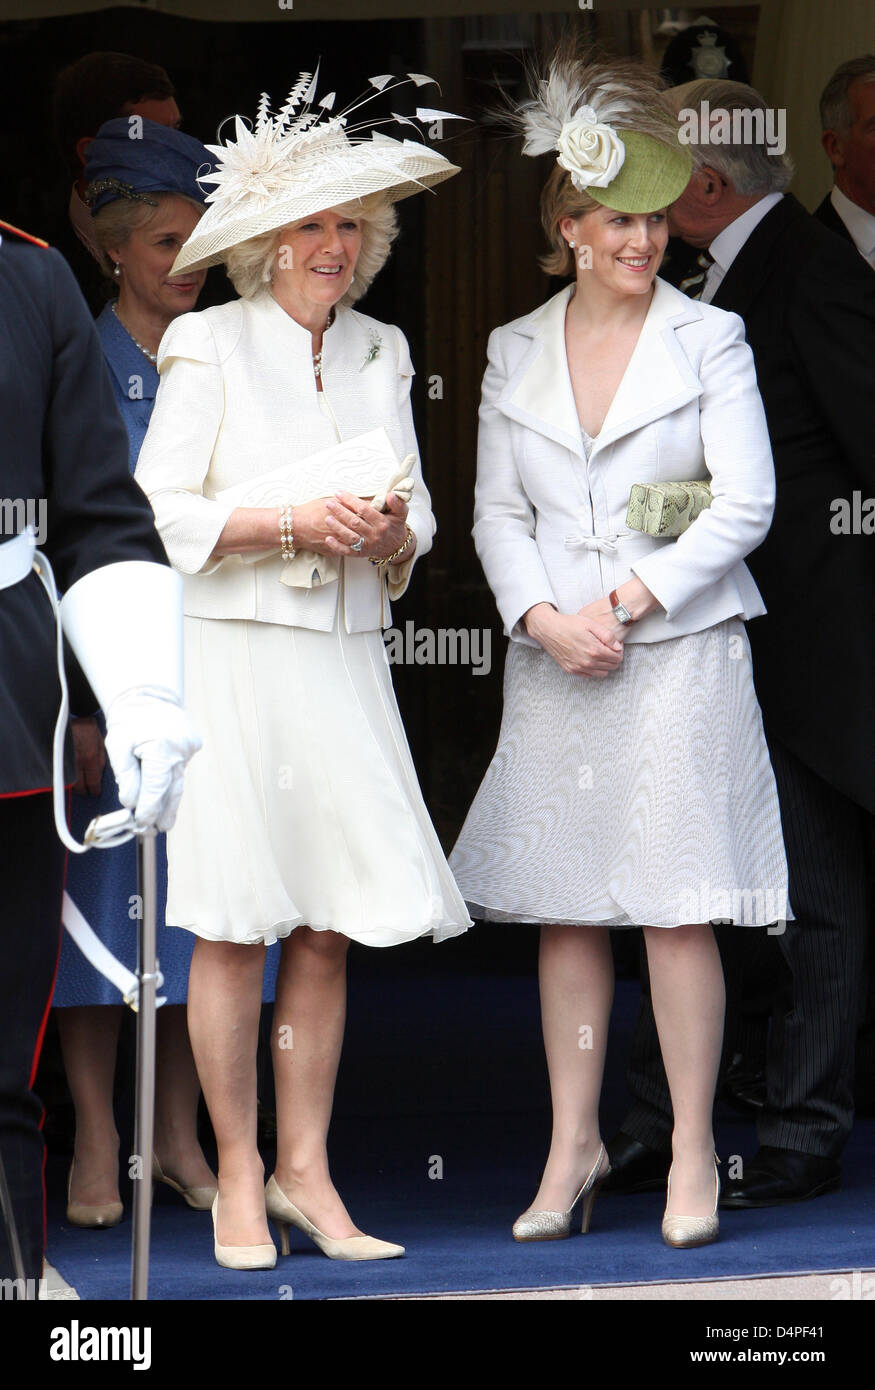 camilla-duchess-of-cornwall-l-and-princess-sophie-of-wessex-r-attend-D4PF41.jpg